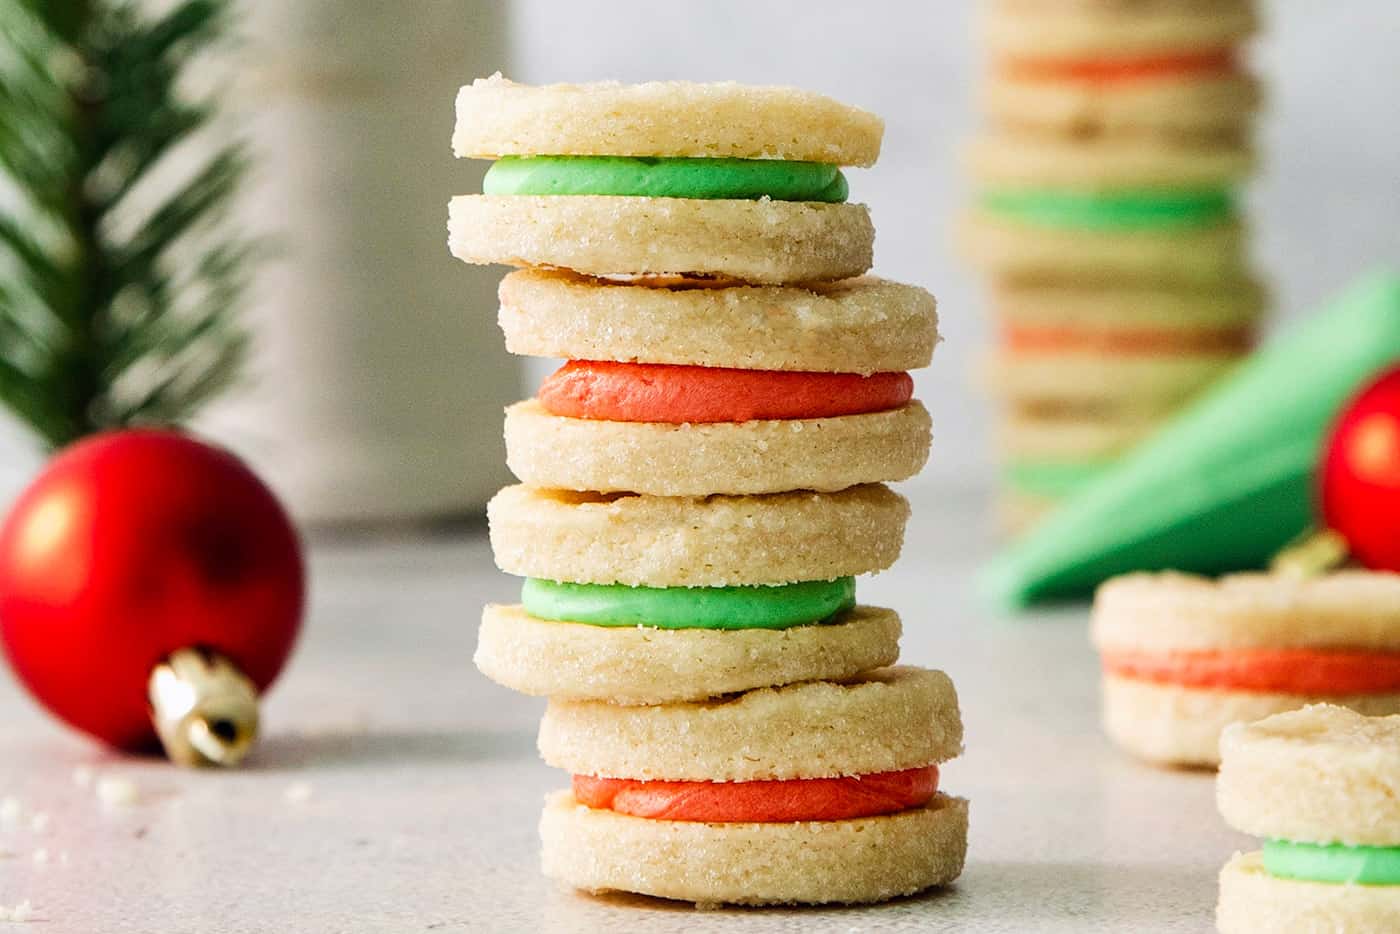 A stack of cream wafter cookies with red and green filling.